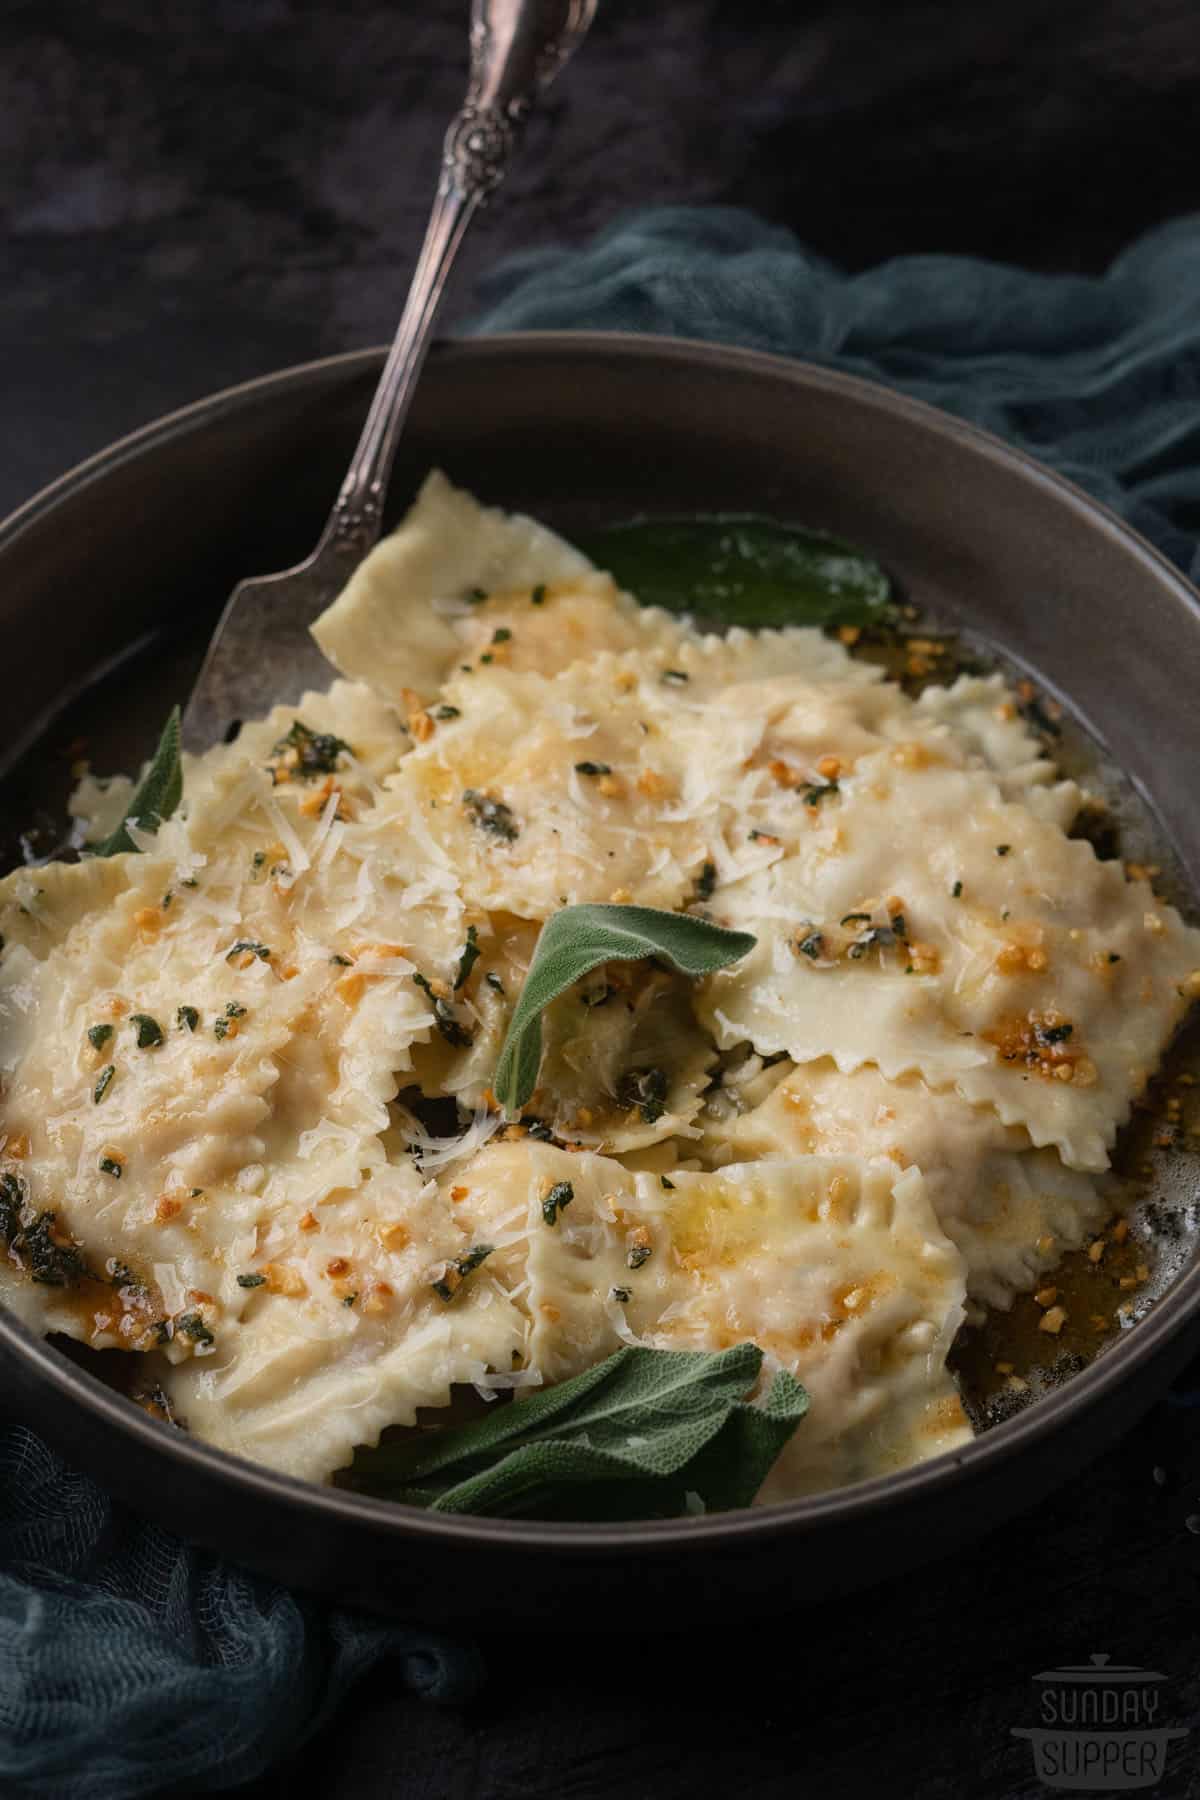 sage brown butter sauce drizzled over ravioli in a black dish